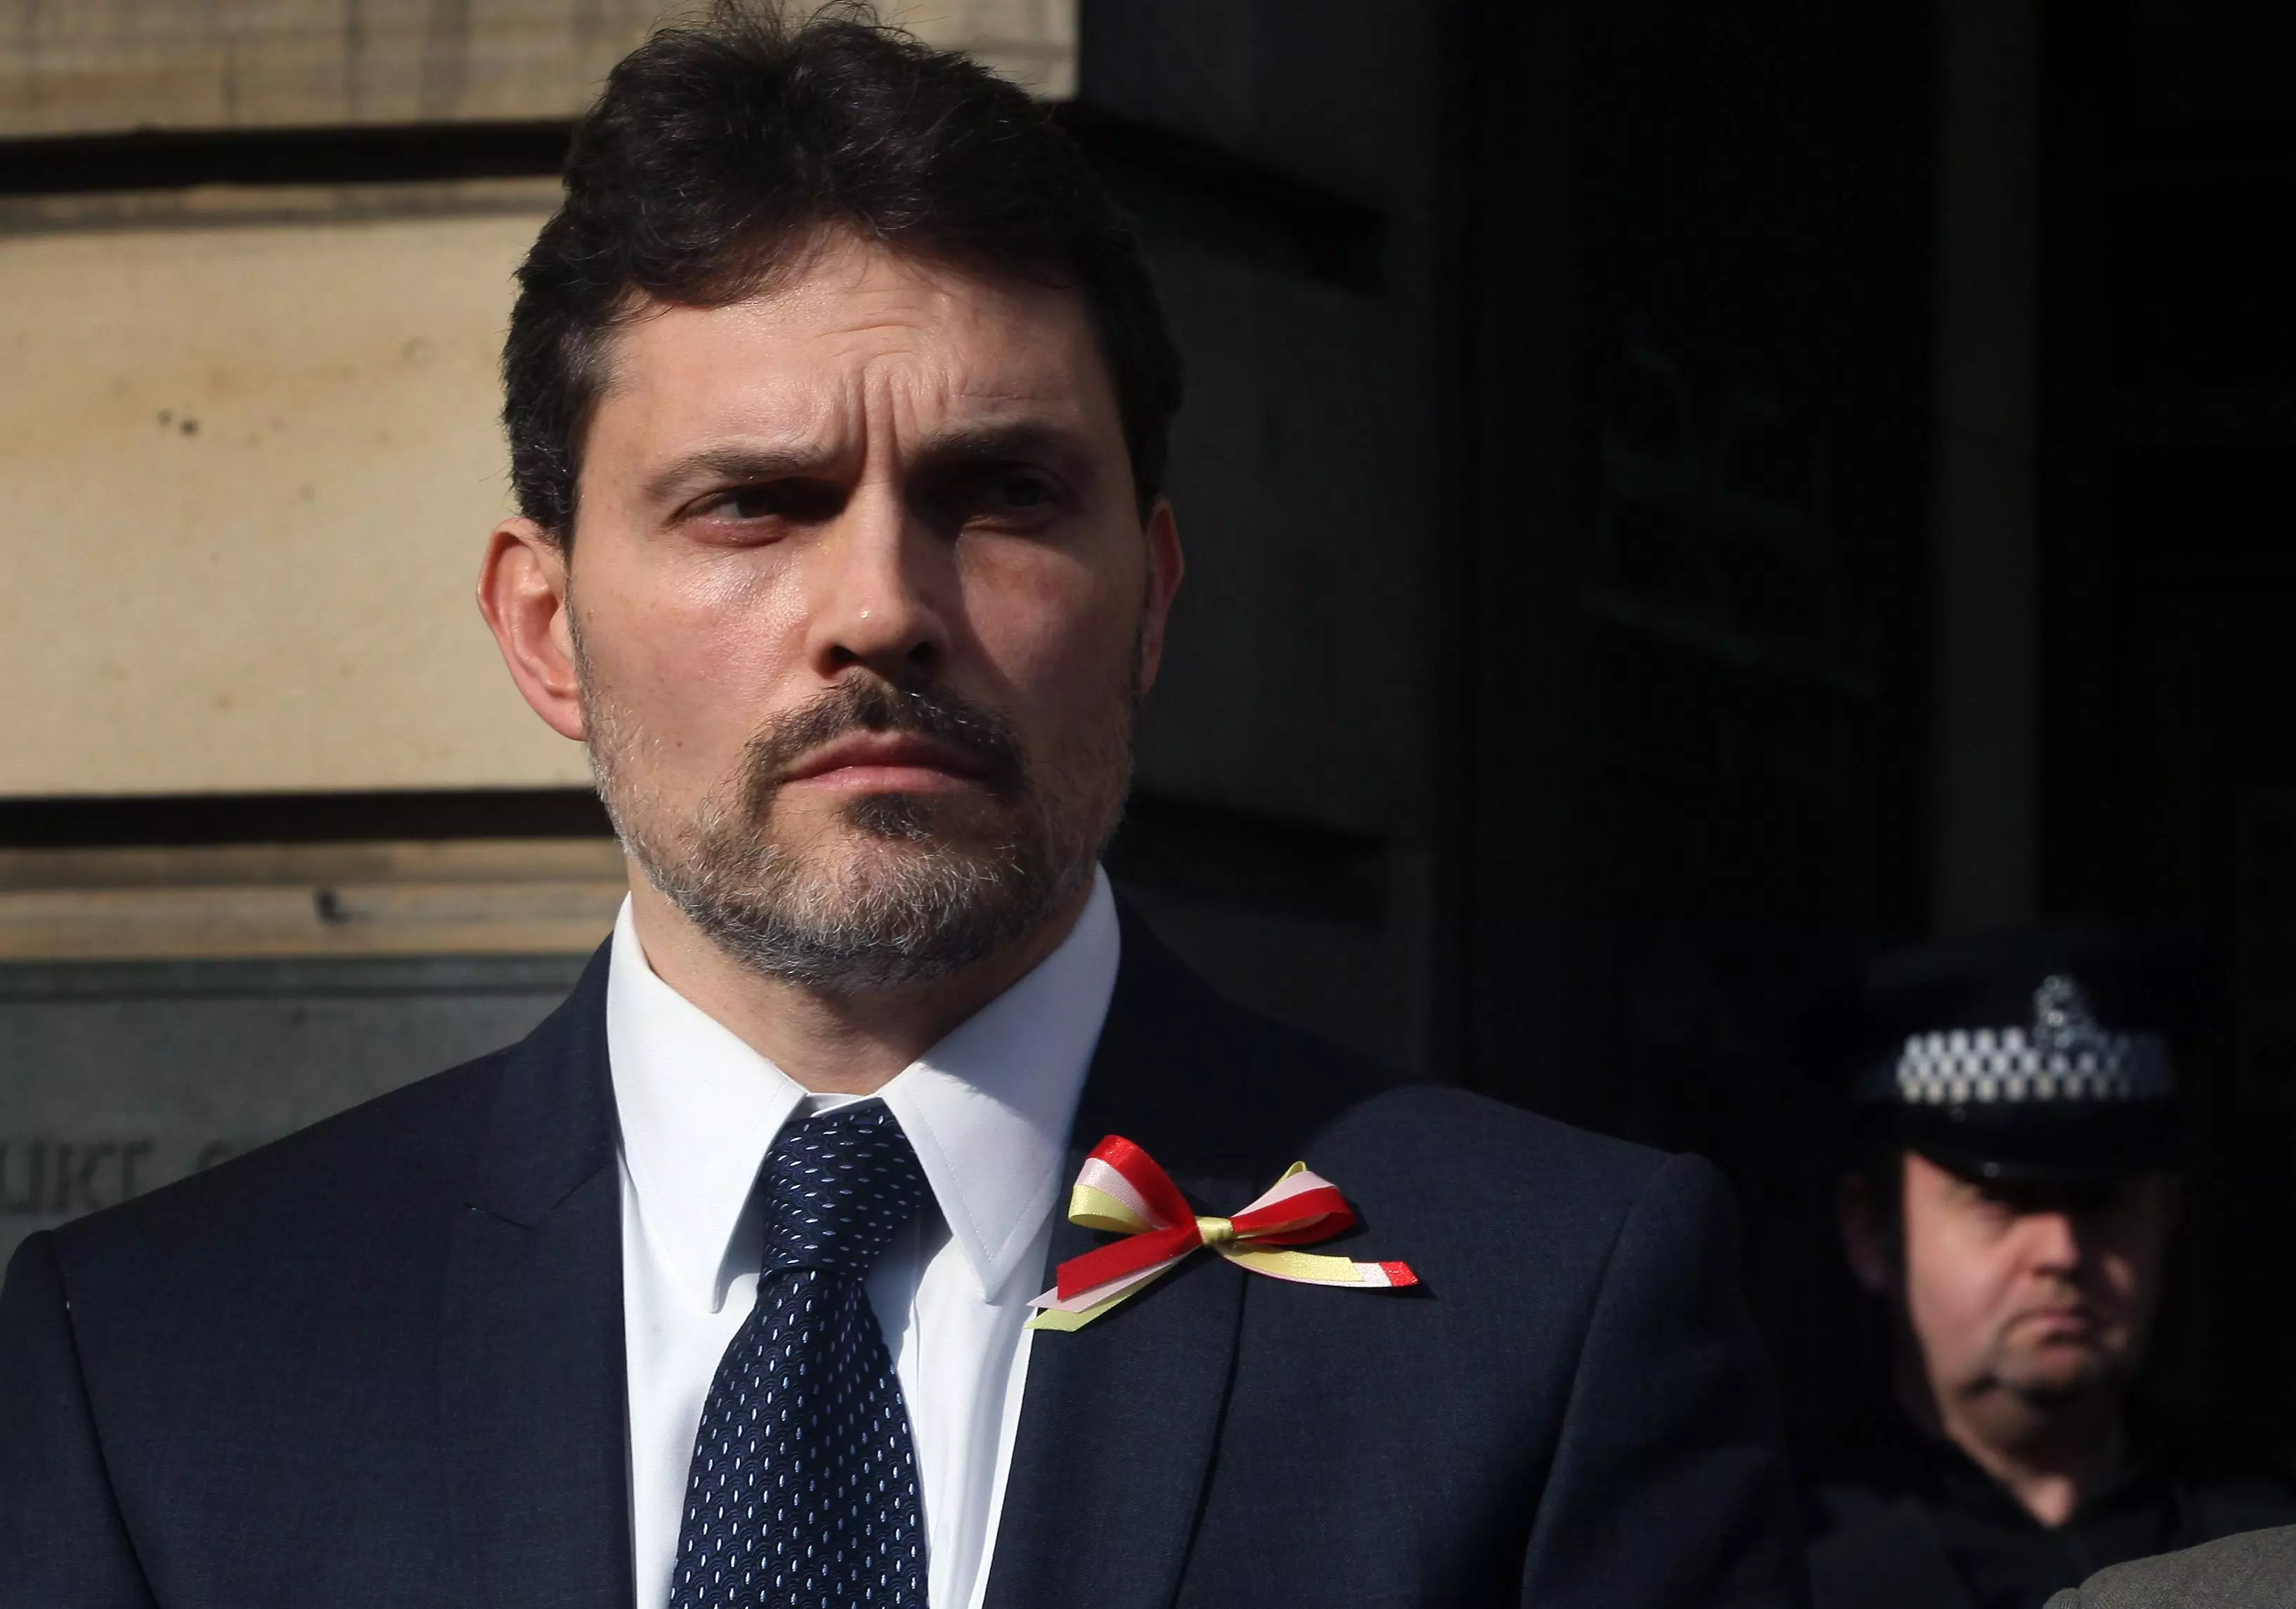 Pasquale Riggi, the father of the three children stabbed to death by their mother Theresa Riggi, leaving the High Court in Edinburgh in 2011. (